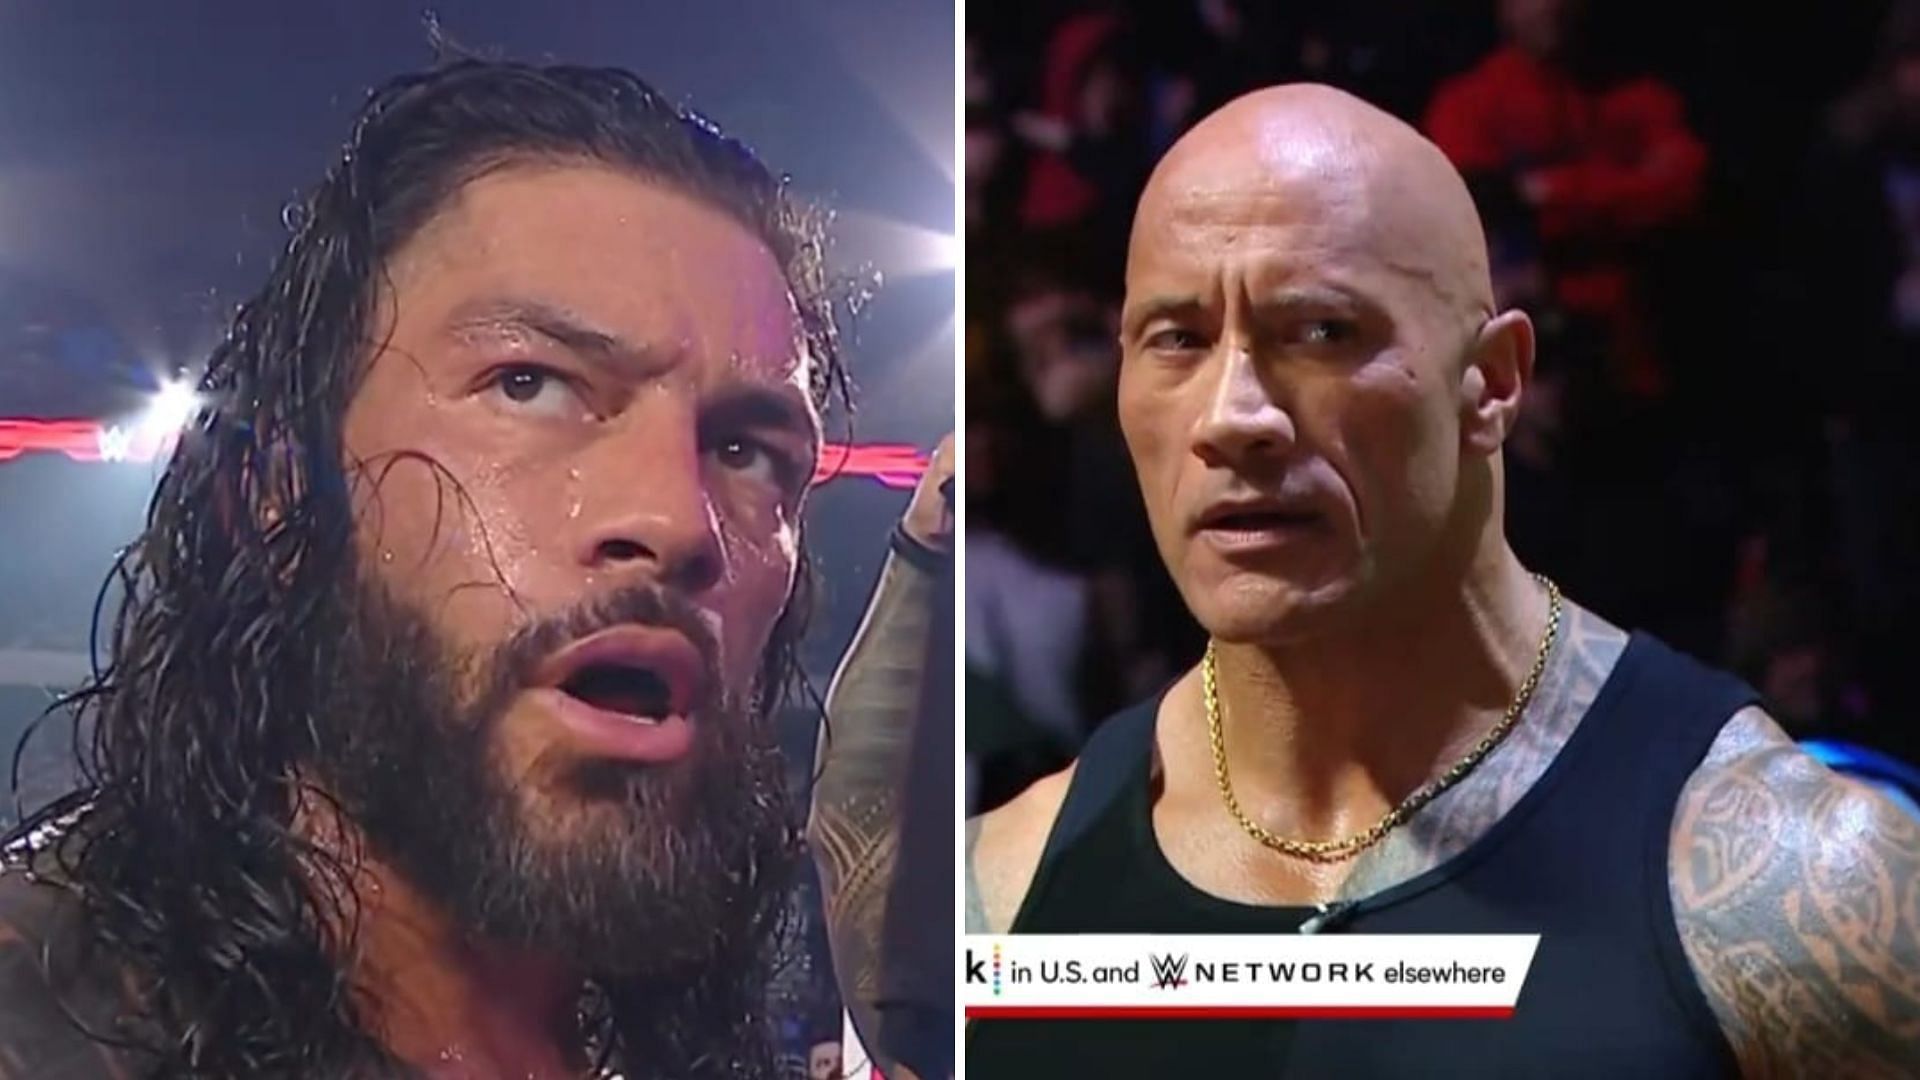 The Rock and Roman Reigns have joined forces on SmackDown